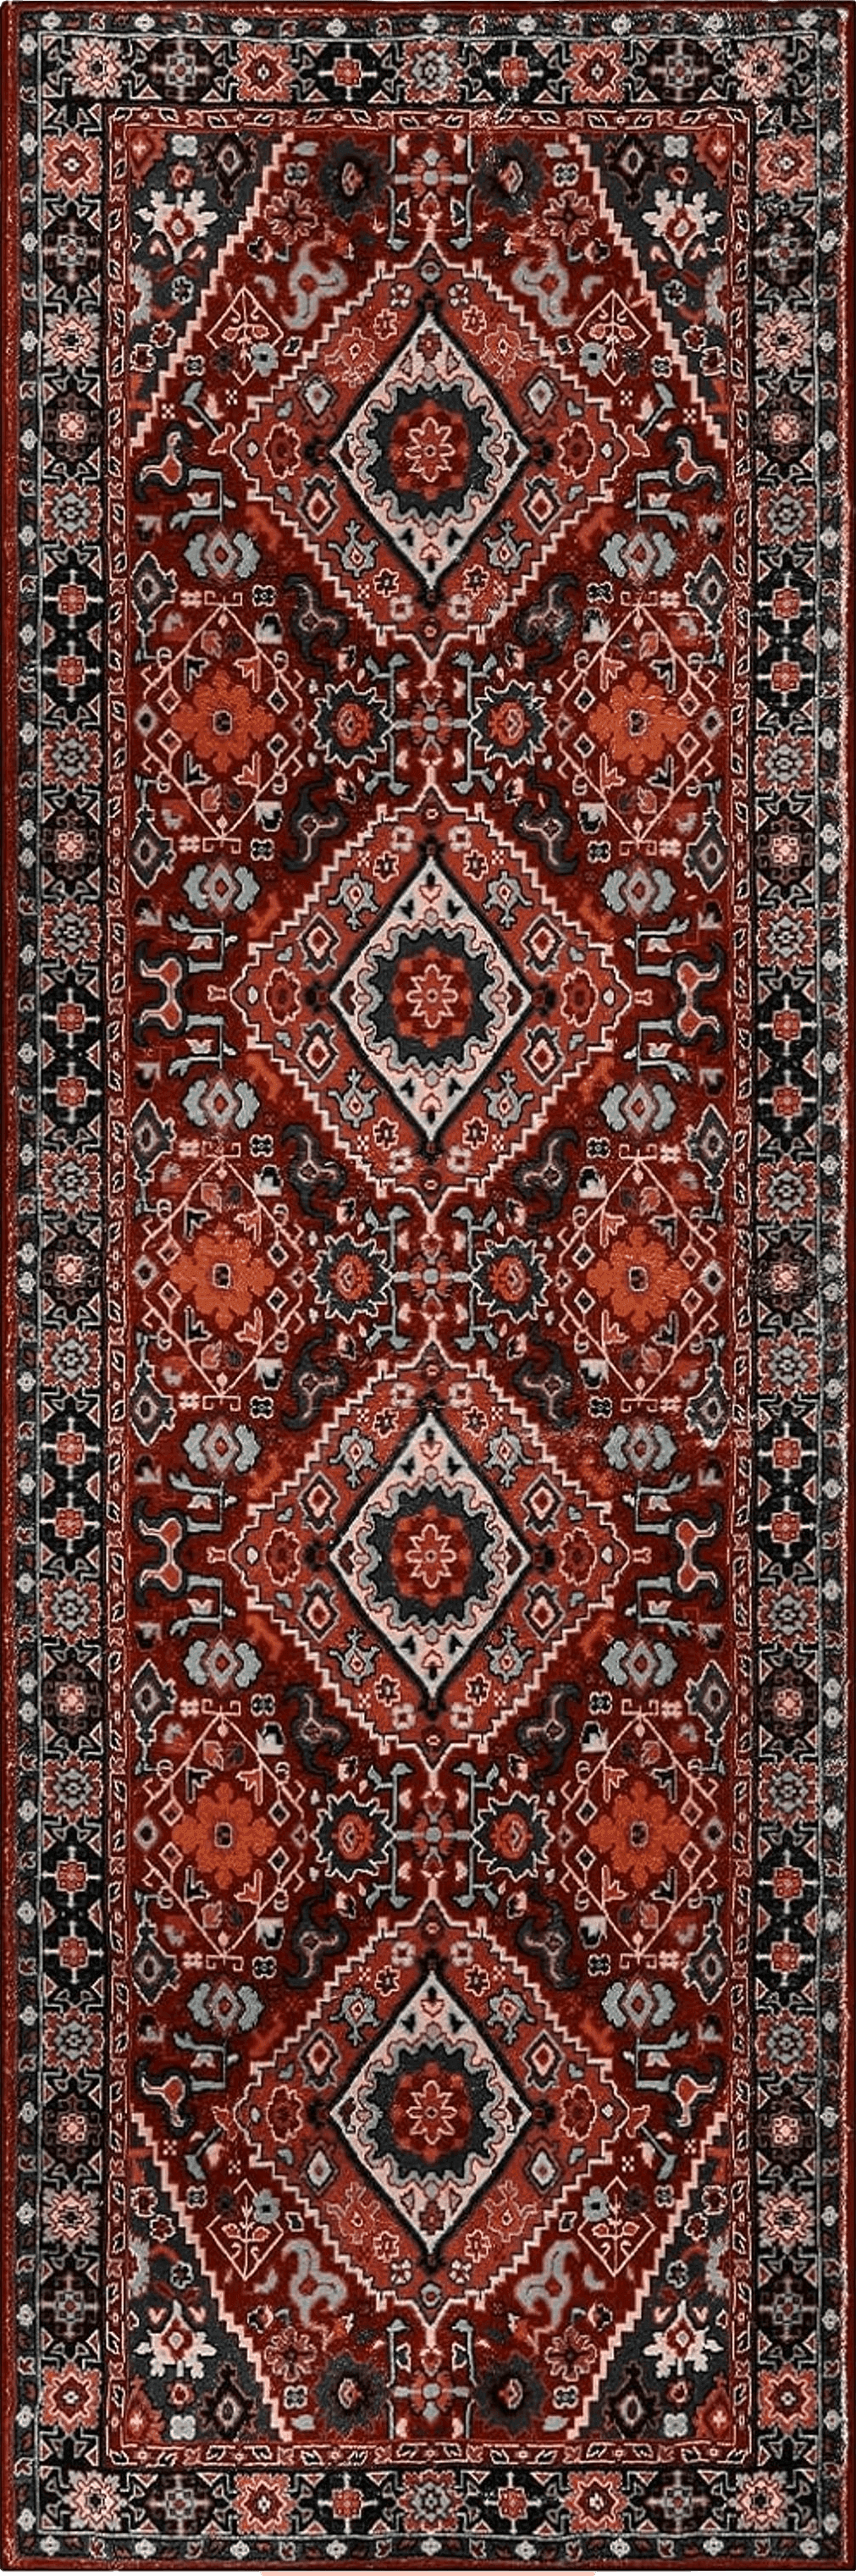 Oriental Beeiva Oriental Hallway Runner Rug, 2x6 Red Carpet Runners Rugs for Hallways 2x6 Rug for Bedroom Kitchen Bathroom, Vintage Non Slip Bedside Laundry Room Runner Rugs with Rubber Backing